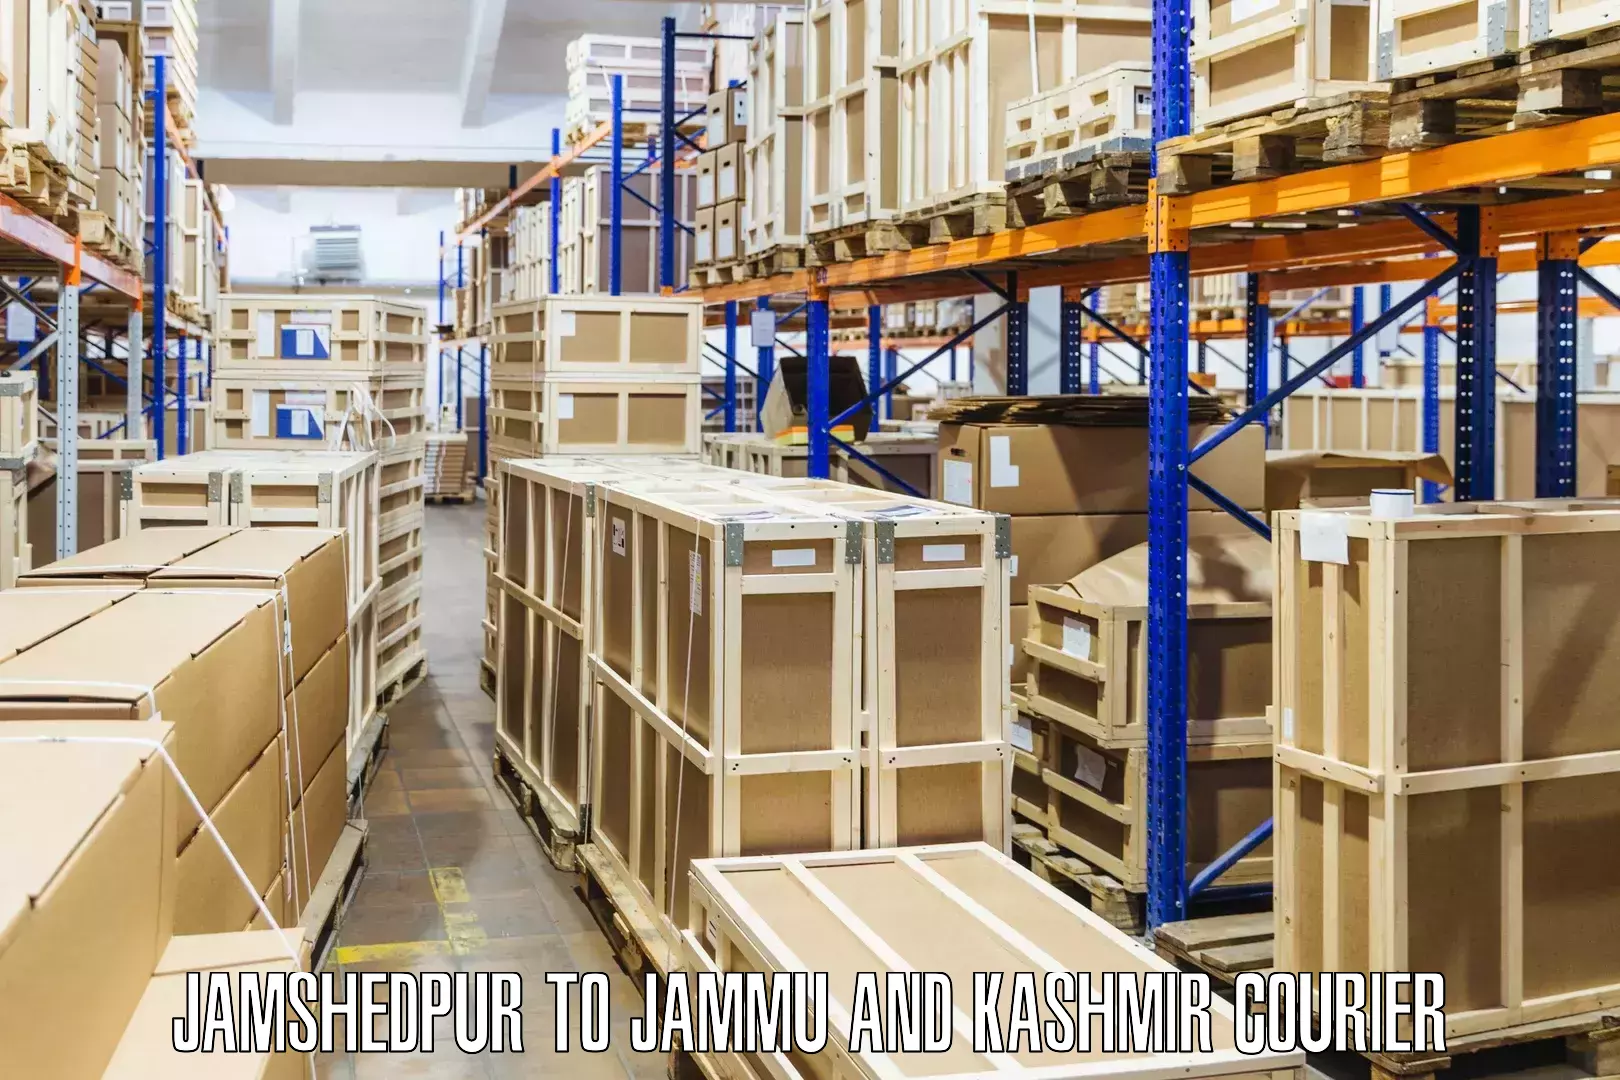 Parcel handling and care in Jamshedpur to Jammu and Kashmir